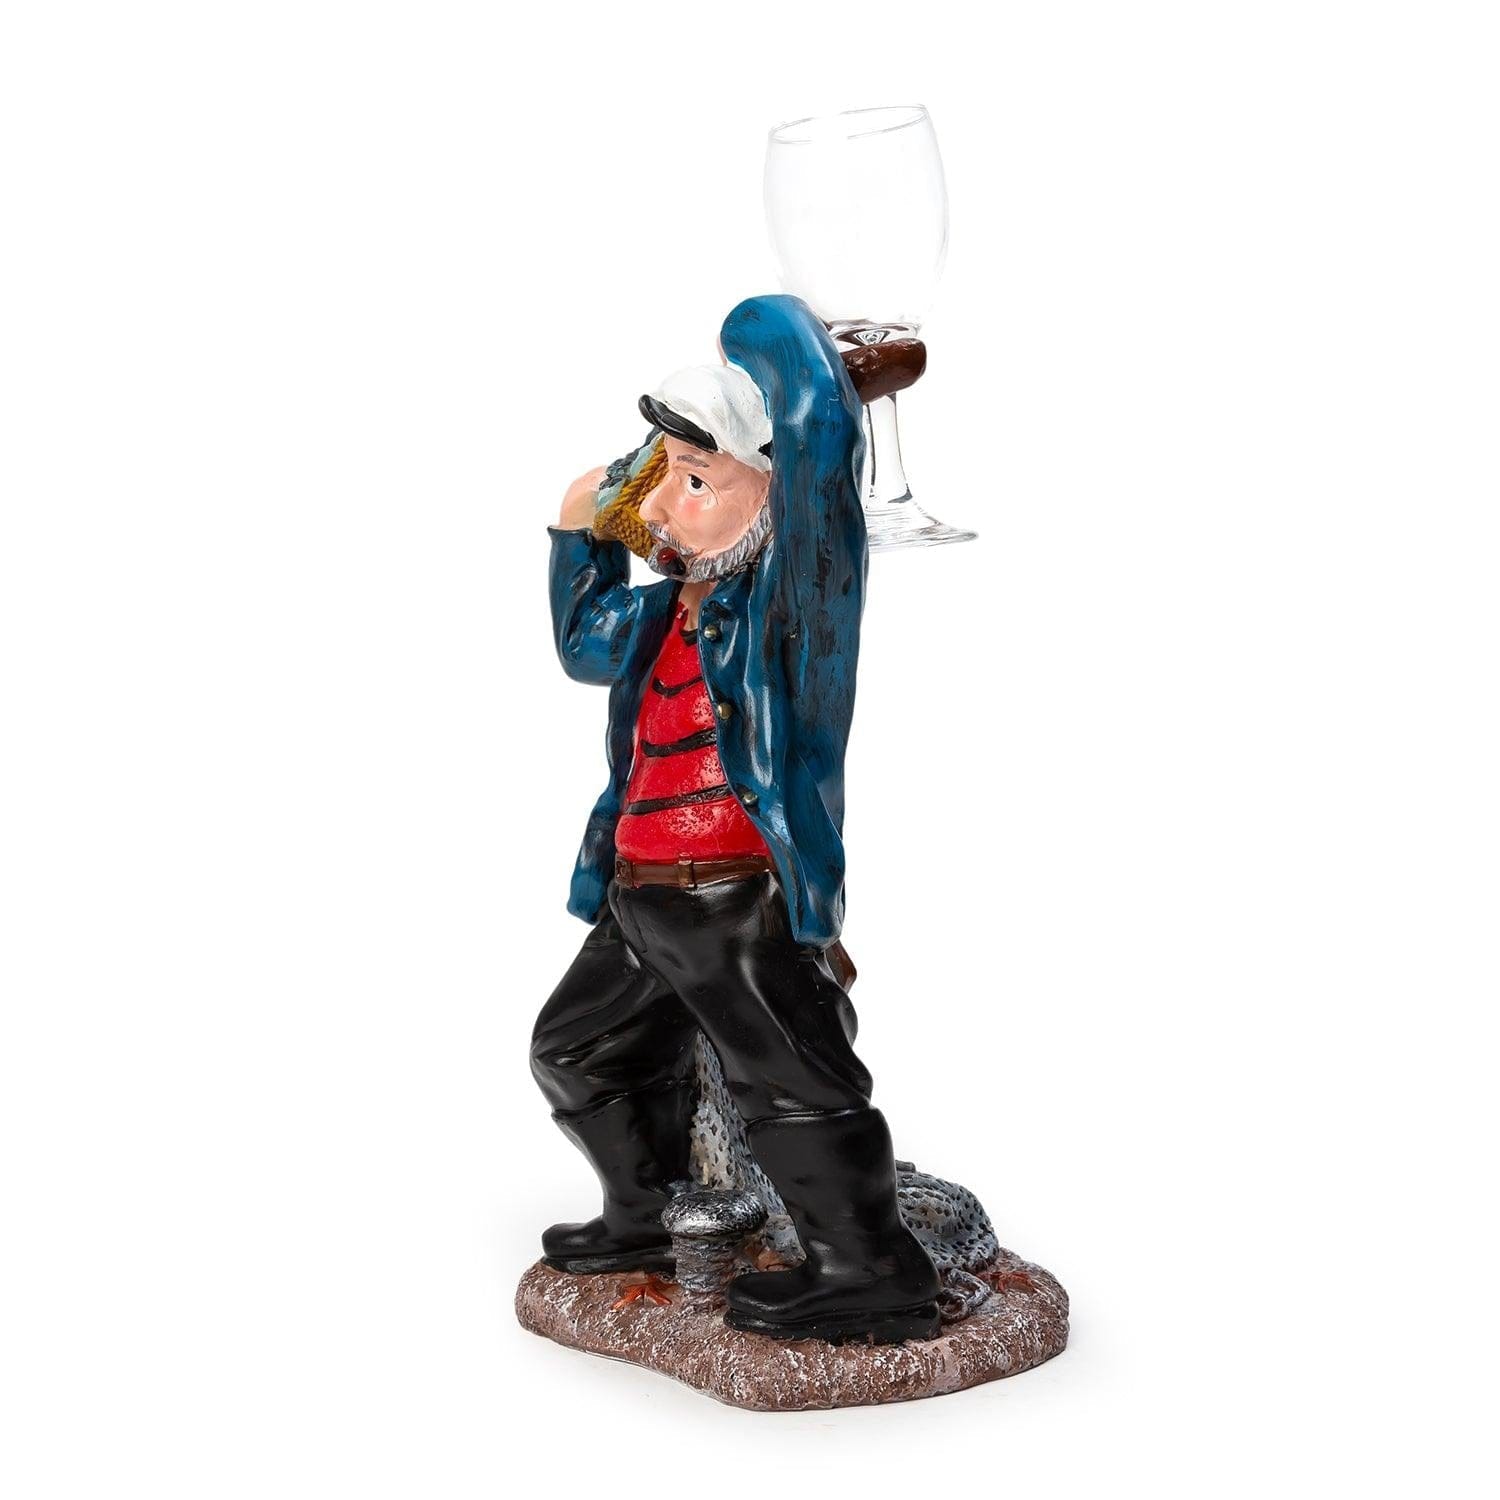 Nautical Sailor Figurine Resin Bottle Holder with 1 Wine Glass Set (Laundry - Red Shirt)